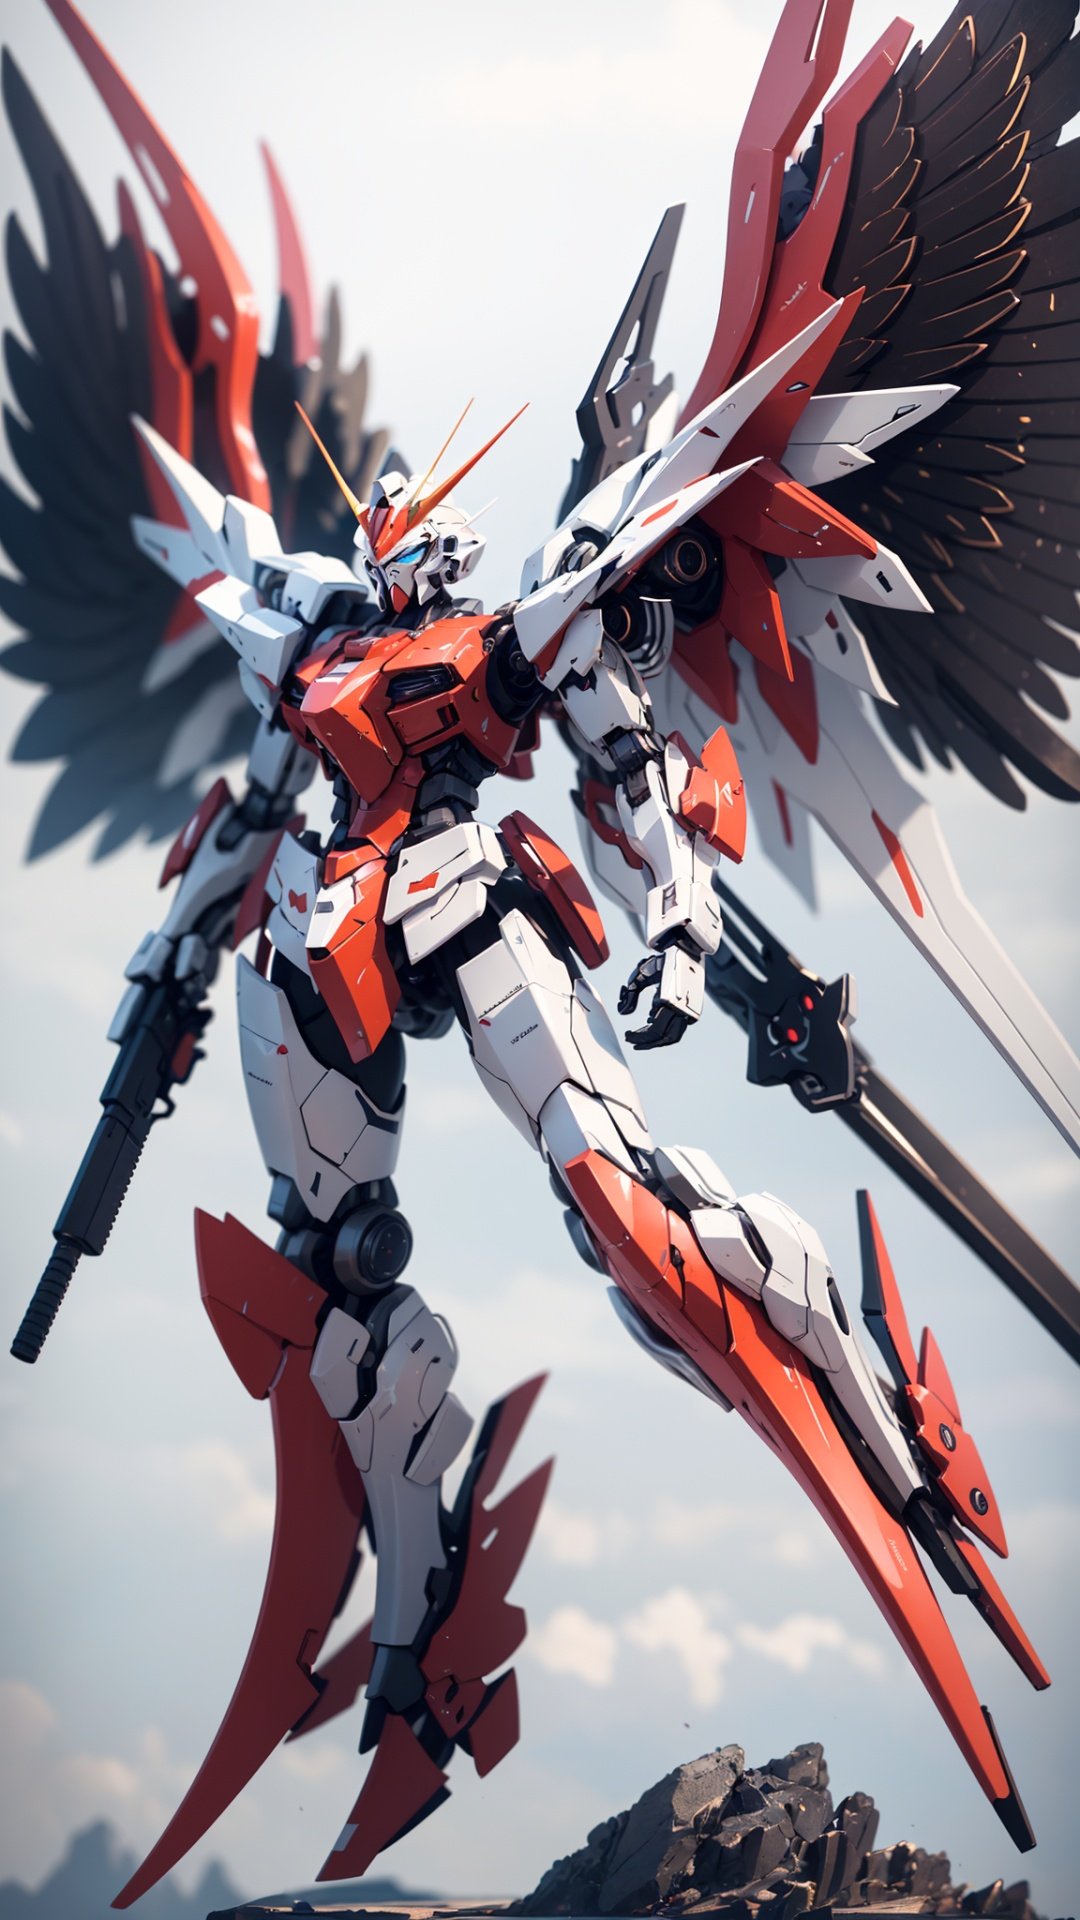 Hyperrealistic art BJ_Gundam,wings,solo,blue_eyes,weapon,wings,gun,no_humans,glowing,robot,mecha,clenched_hands,floating,science_fiction,mechanical_wings,v-fin,cinematic lighting,strong contrast,high level of detail,Best quality,masterpiece,White background,. Extremely high-resolution details,photographic,realism pushed to extreme,fine texture,incredibly lifelike,<lora:Gundam_Mecha_v5.2:0.6>,